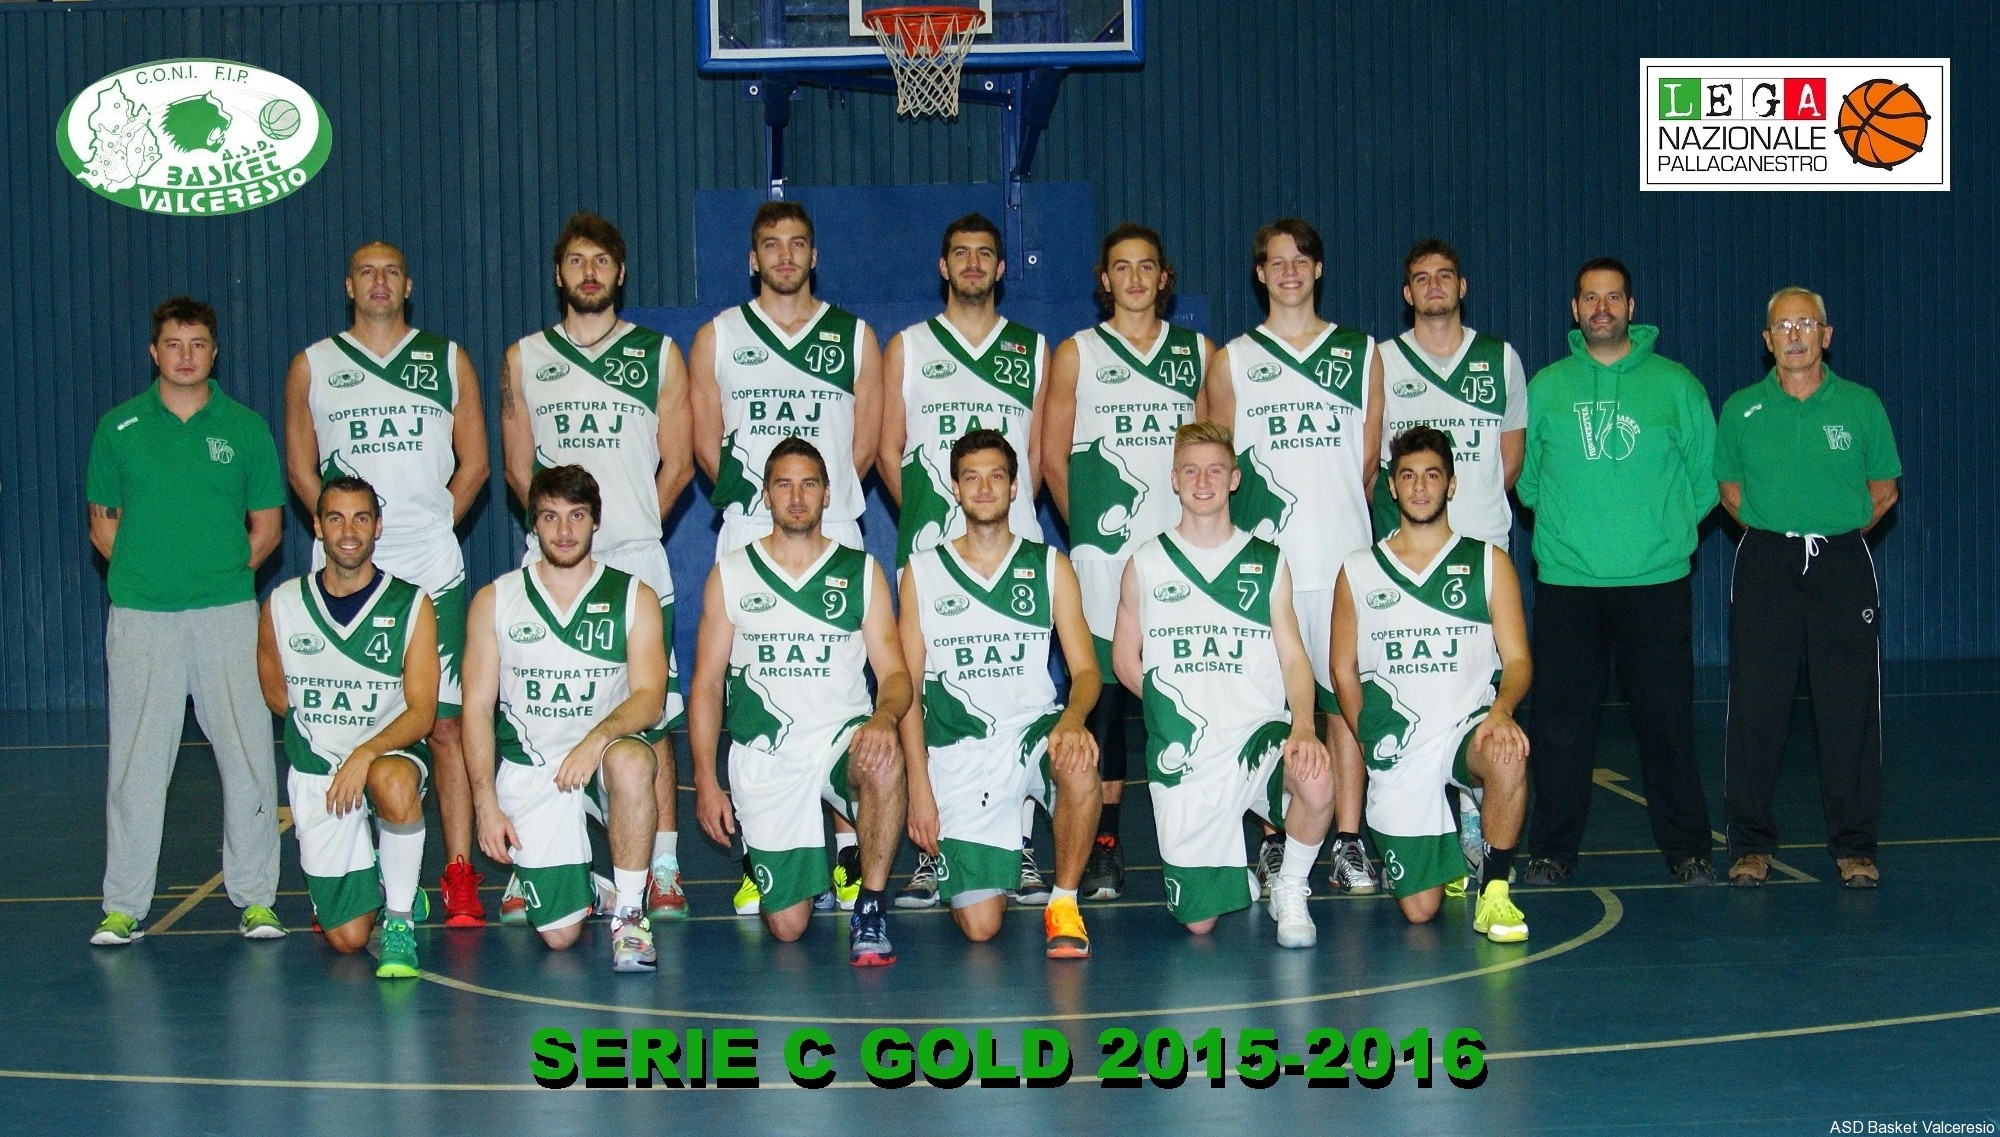 A.S.D. BASKET VALCERESIO